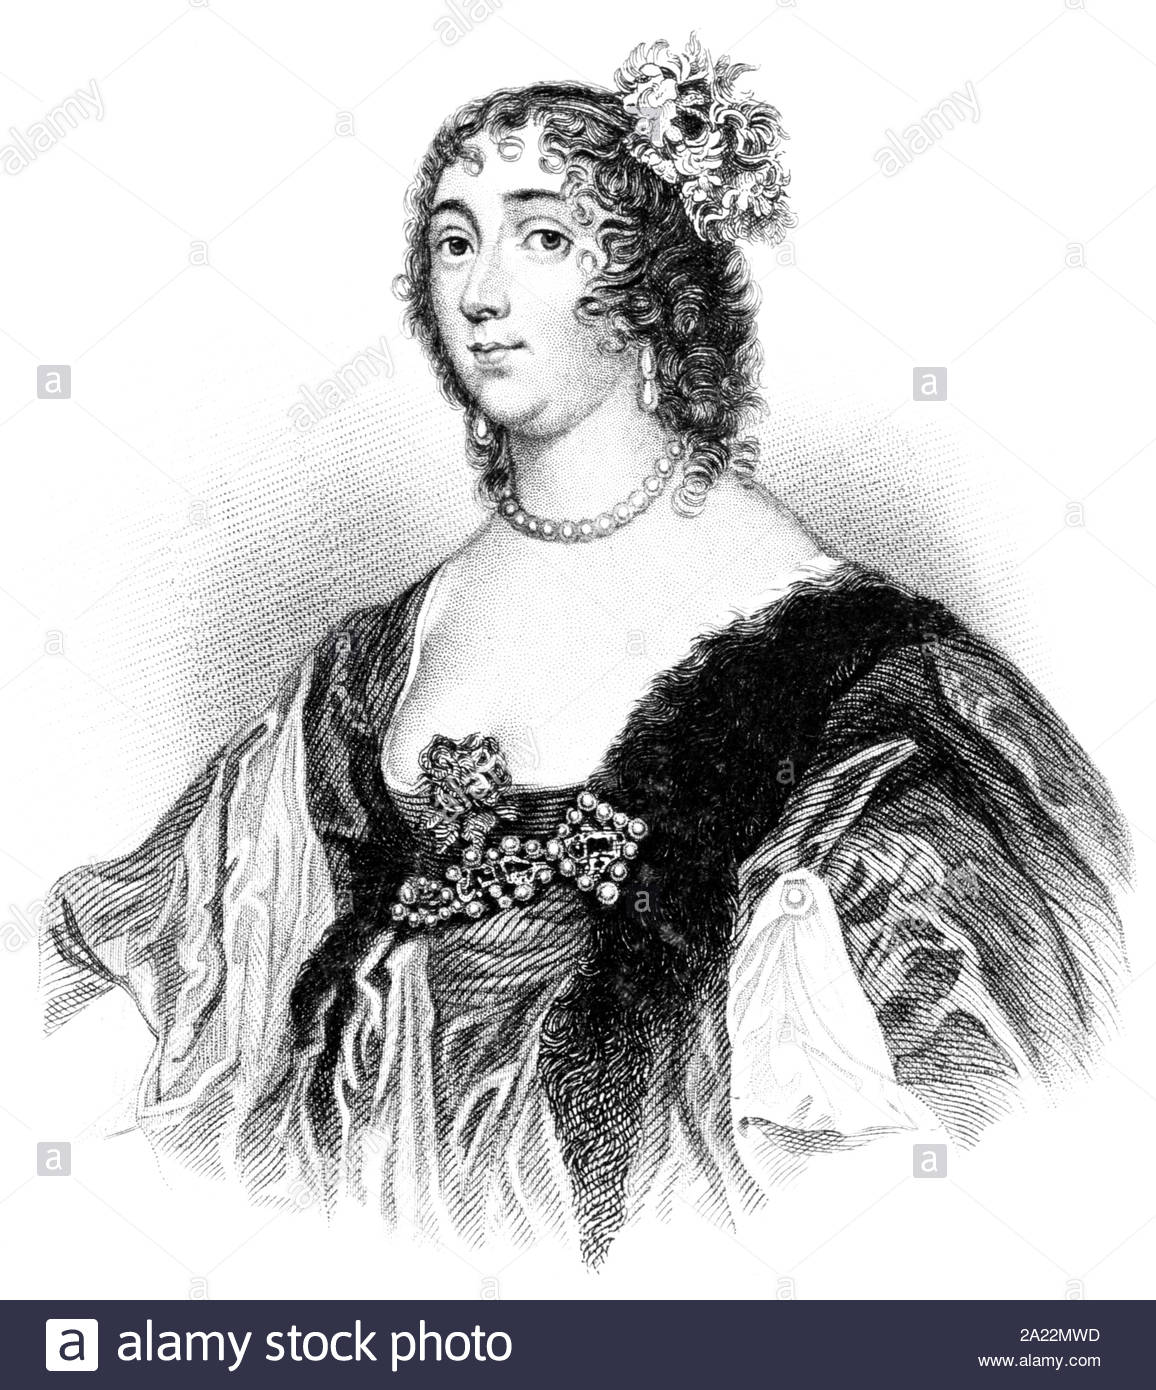 Lucy Percy portrait, Countess of Carlisle, 1599 – 1660, was an English courtier during the English Civil War, vintage illustration from 1850 Stock Photo